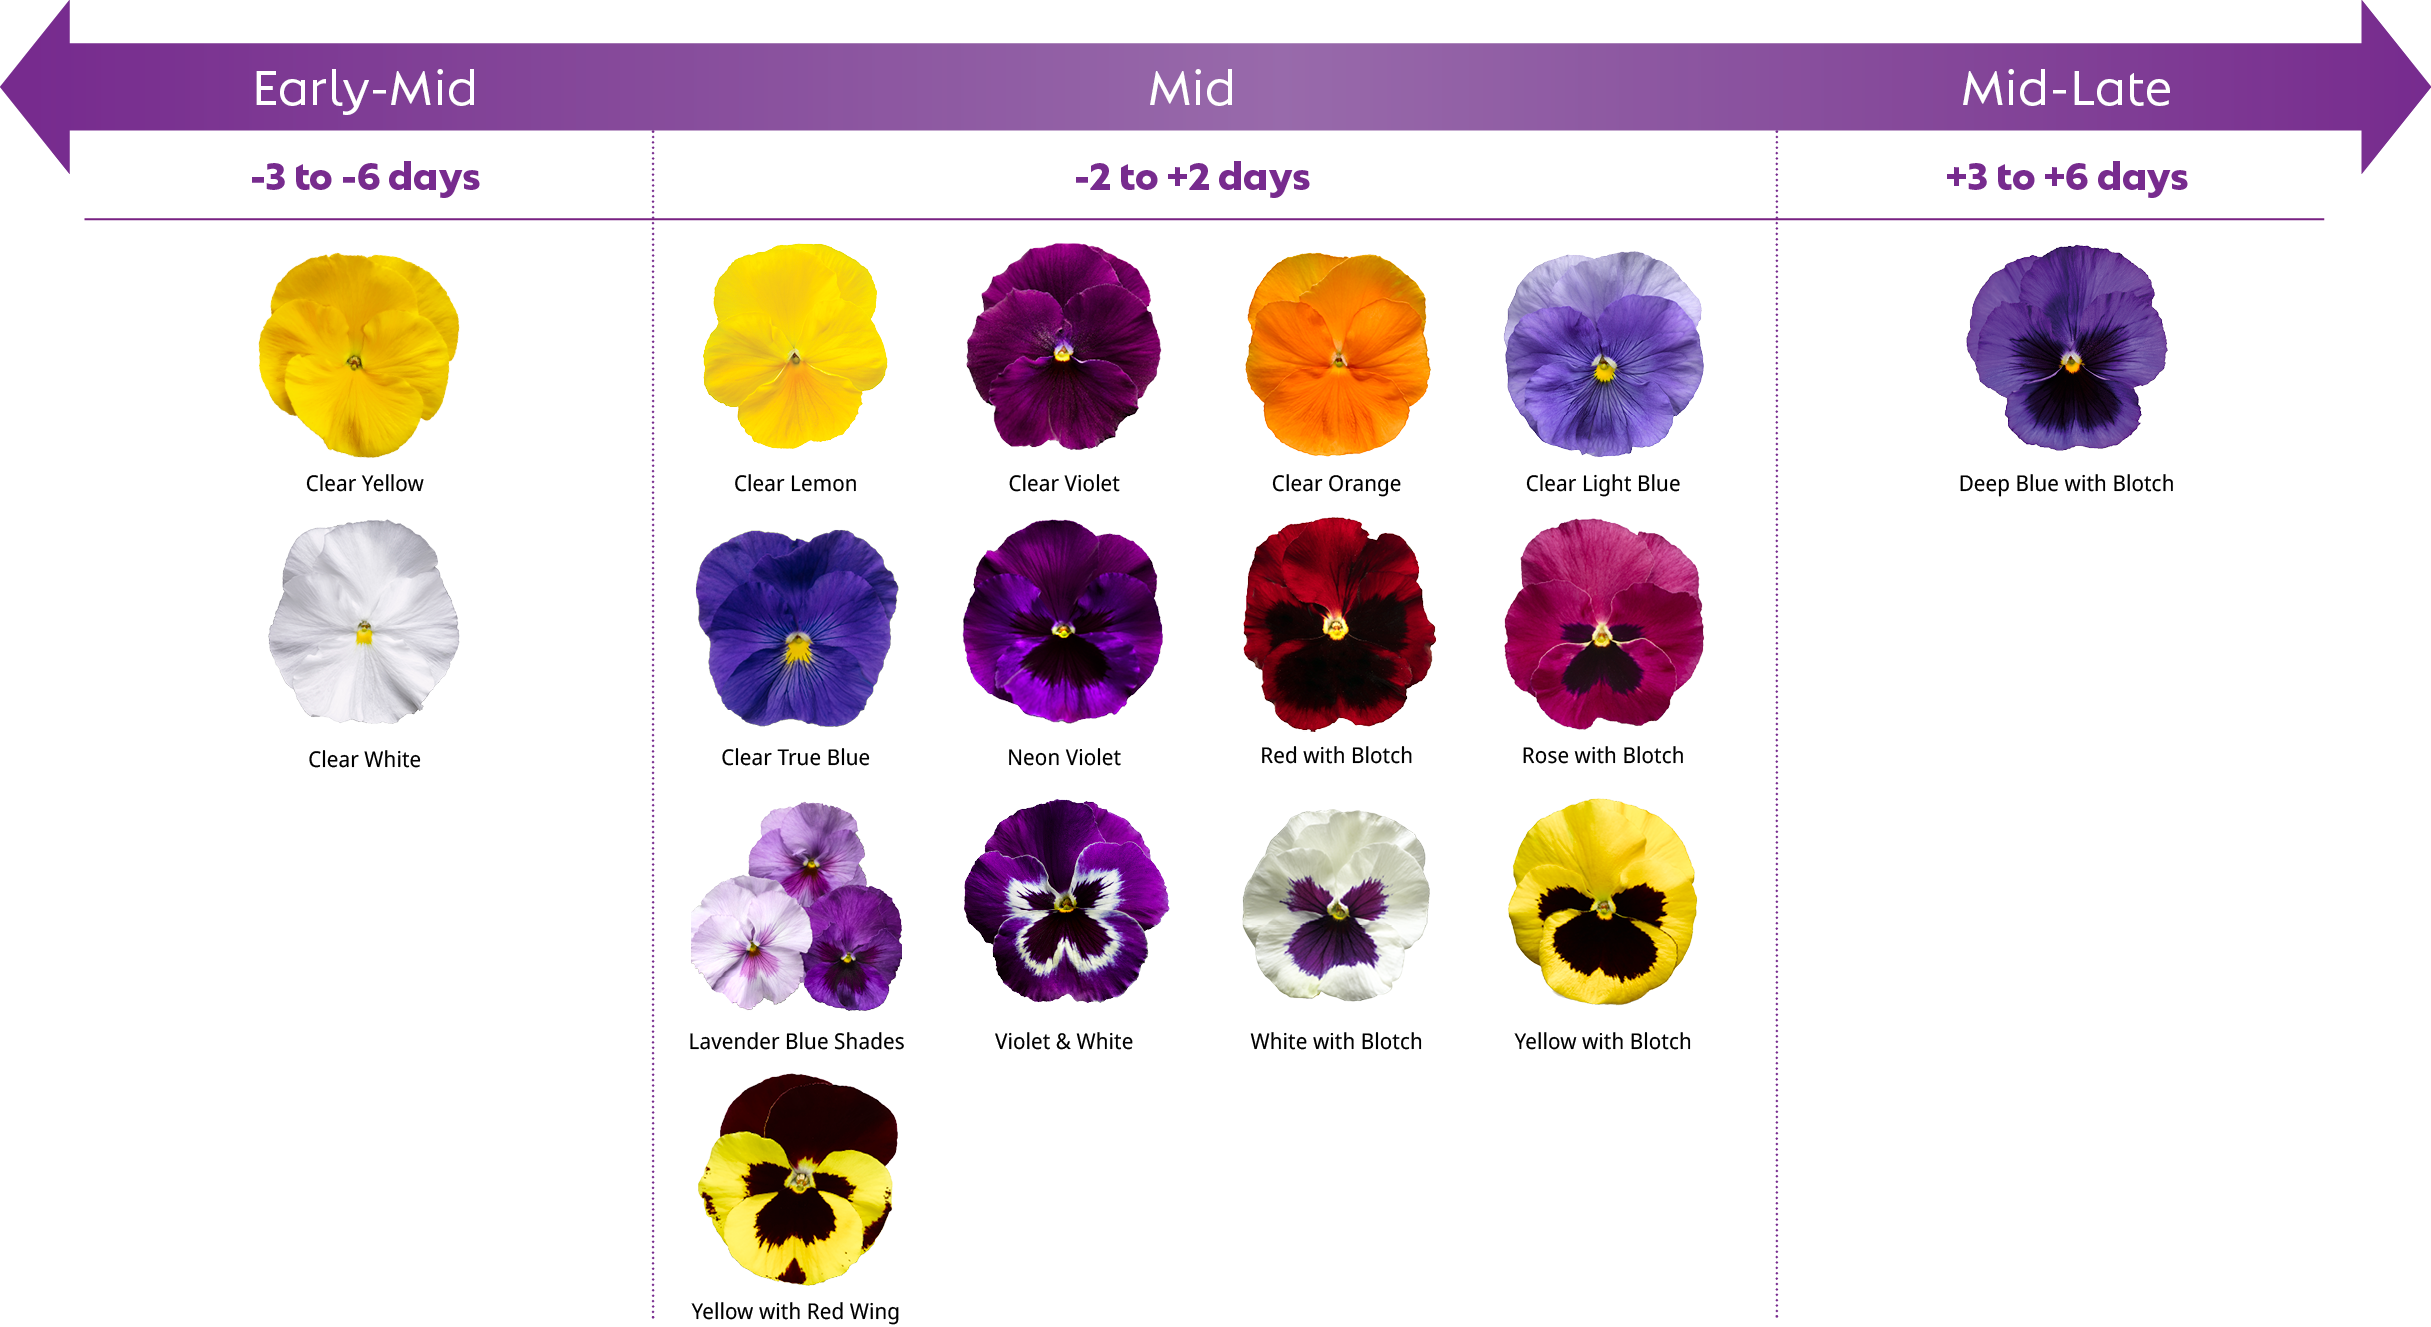 Delta Pro Pansy Flowering Time Comparison by Variety. The chart shows a flower timing chart for pansy time comparison by variety